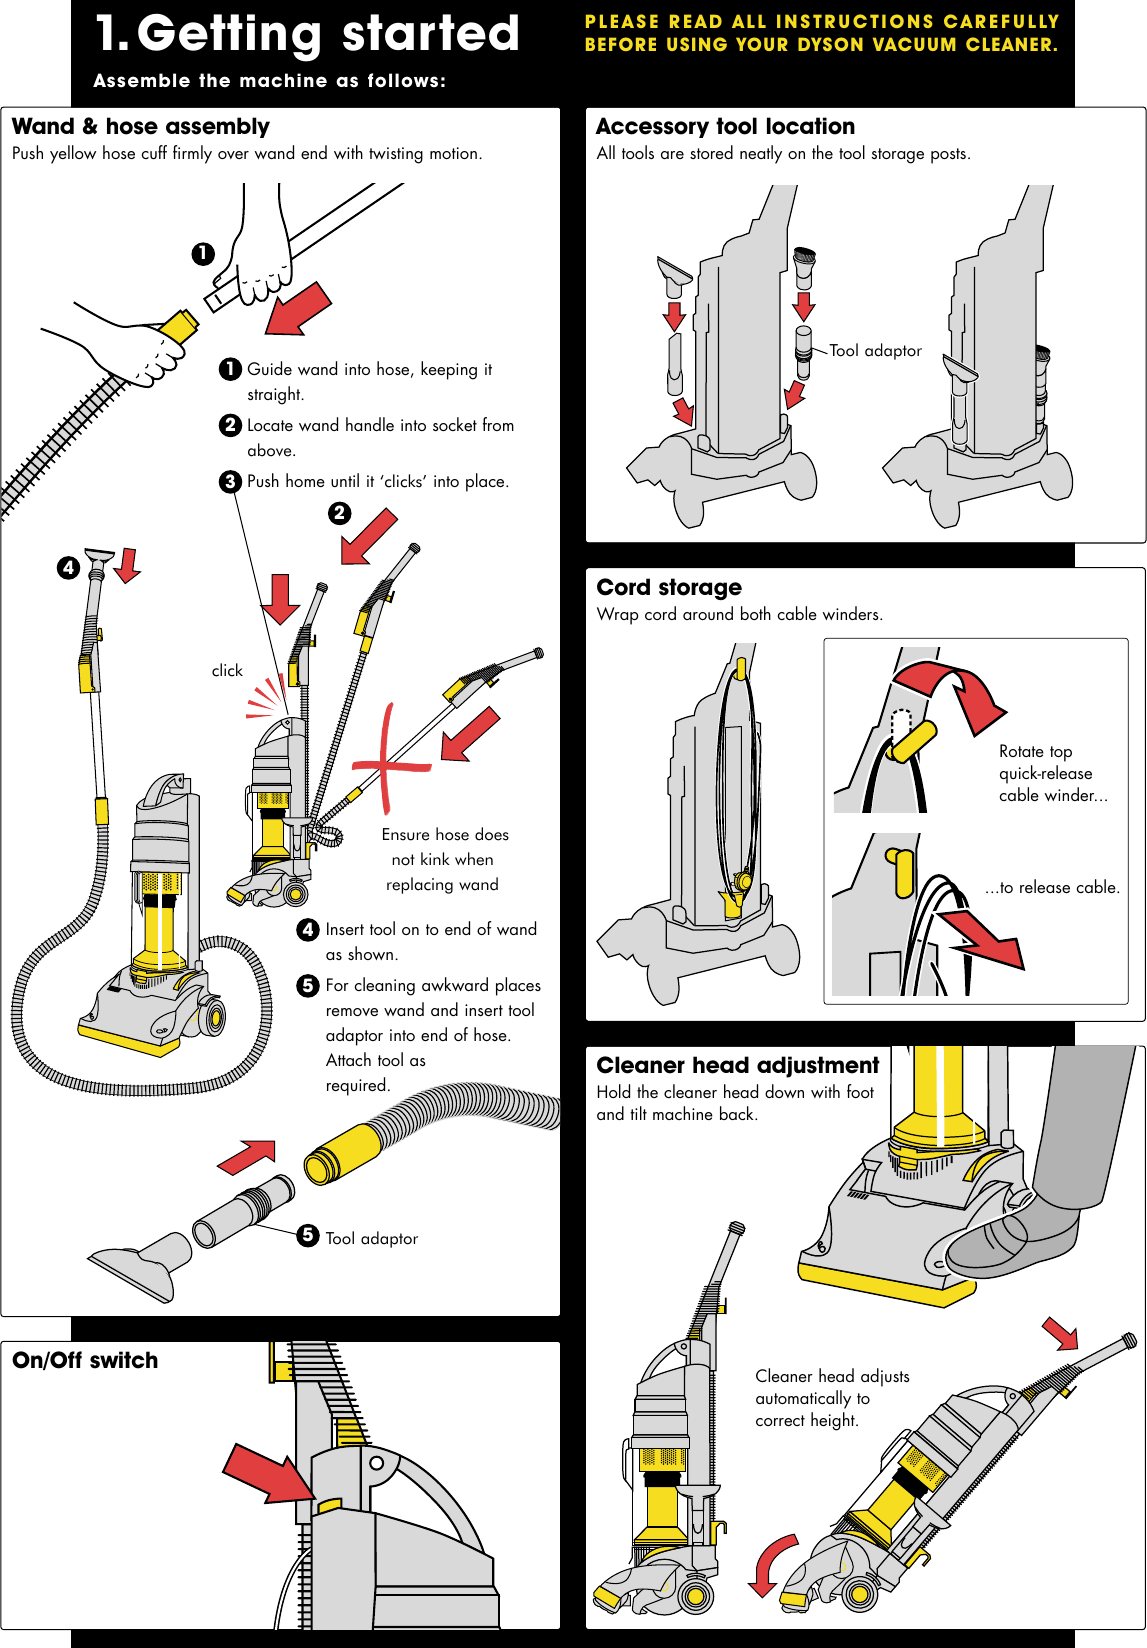 Page 2 of 6 - Dyson Dyson-Dc-01-Users-Manual- 00753-01 DC01 OPERATING MANUAL  Dyson-dc-01-users-manual